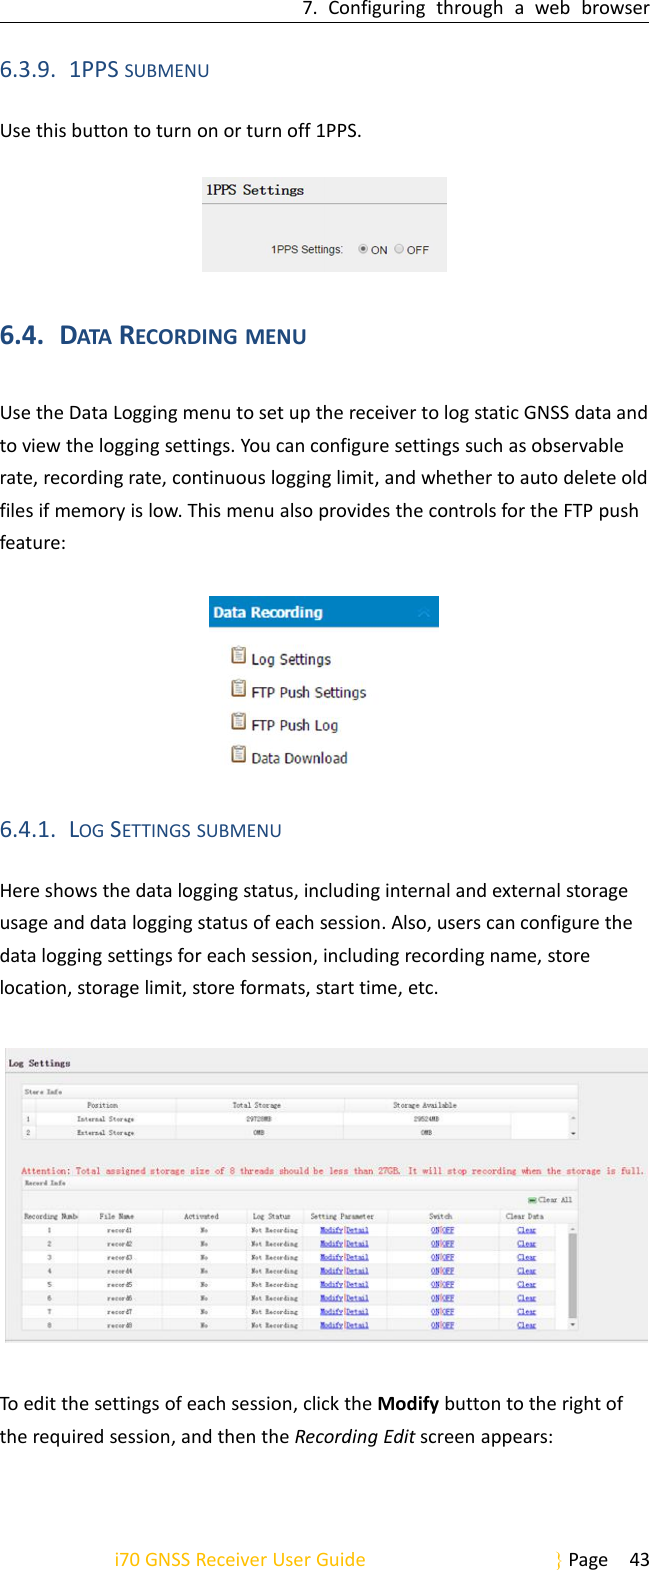 7. Configuring through a web browseri70 GNSS Receiver User Guide Page 436.3.9. 1PPS SUBMENUUse this button to turn on or turn off 1PPS.6.4. DATA RECORDING MENUUse the Data Logging menu to set up the receiver to log static GNSS data andto view the logging settings. You can configure settings such as observablerate, recording rate, continuous logging limit, and whether to auto delete oldfiles if memory is low. This menu also provides the controls for the FTP pushfeature:6.4.1. LOG SETTINGS SUBMENUHere shows the data logging status, including internal and external storageusage and data logging status of each session. Also, users can configure thedata logging settings for each session, including recording name, storelocation, storage limit, store formats, start time, etc.To edit the settings of each session, click the Modify button to the right ofthe required session, and then the Recording Edit screen appears: